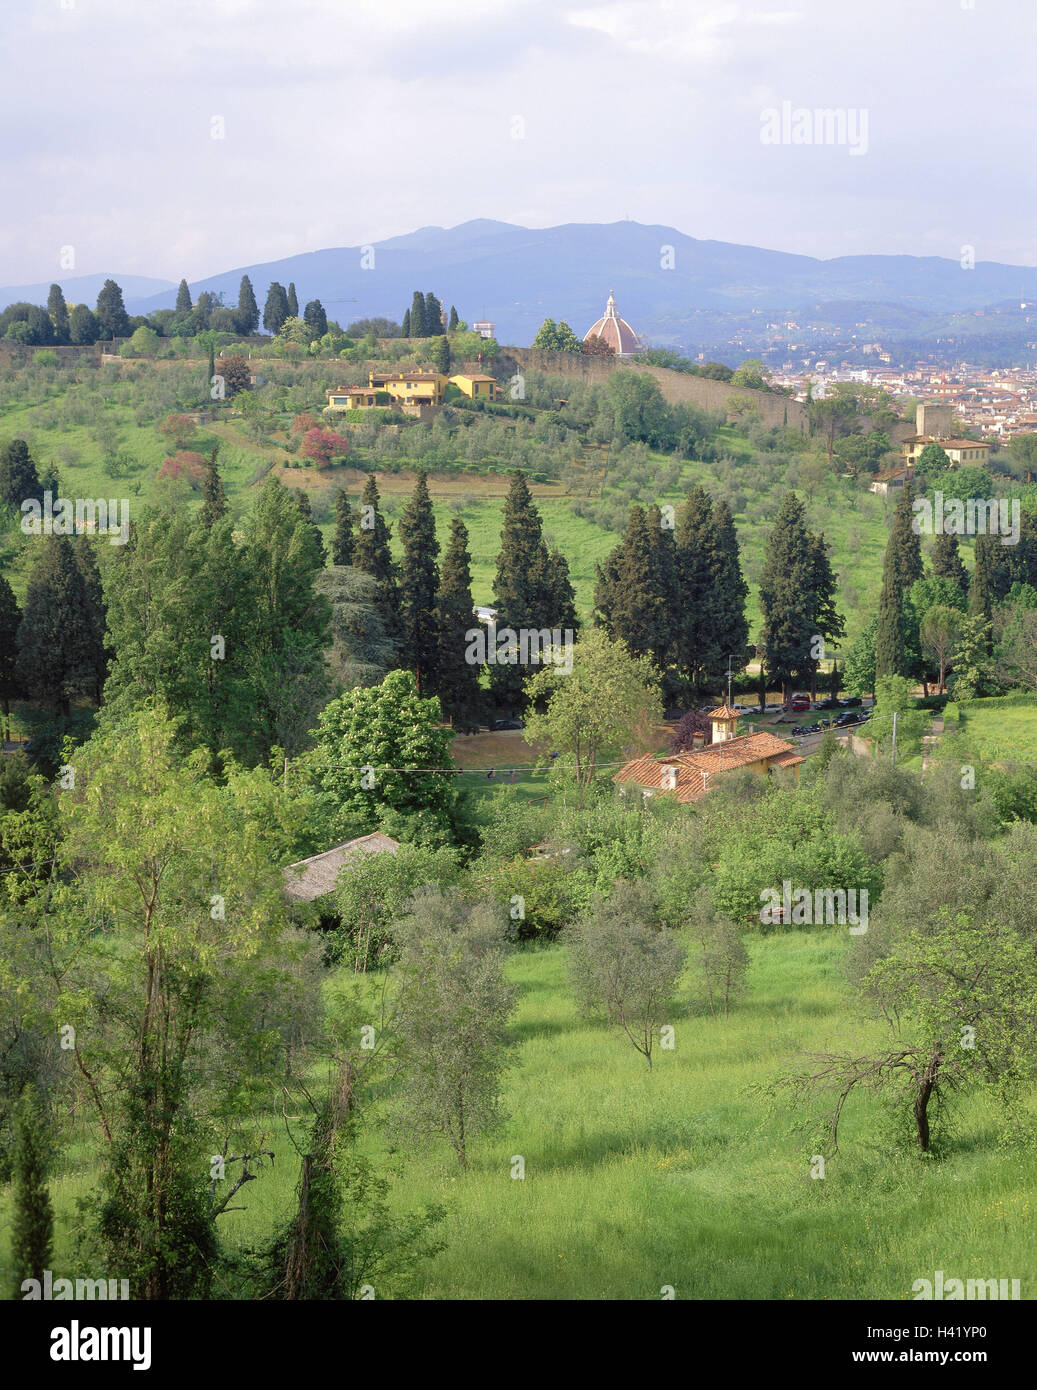 Italy, Tuscany, Florence, Viale Galilei, town view, olive grove, Europe,  Northern Italy, cultural town, town, Firenze, houses, residential houses,  suburb, hill, scenery, olive trees, plants, shrubs, nature, green, summer  Stock Photo -